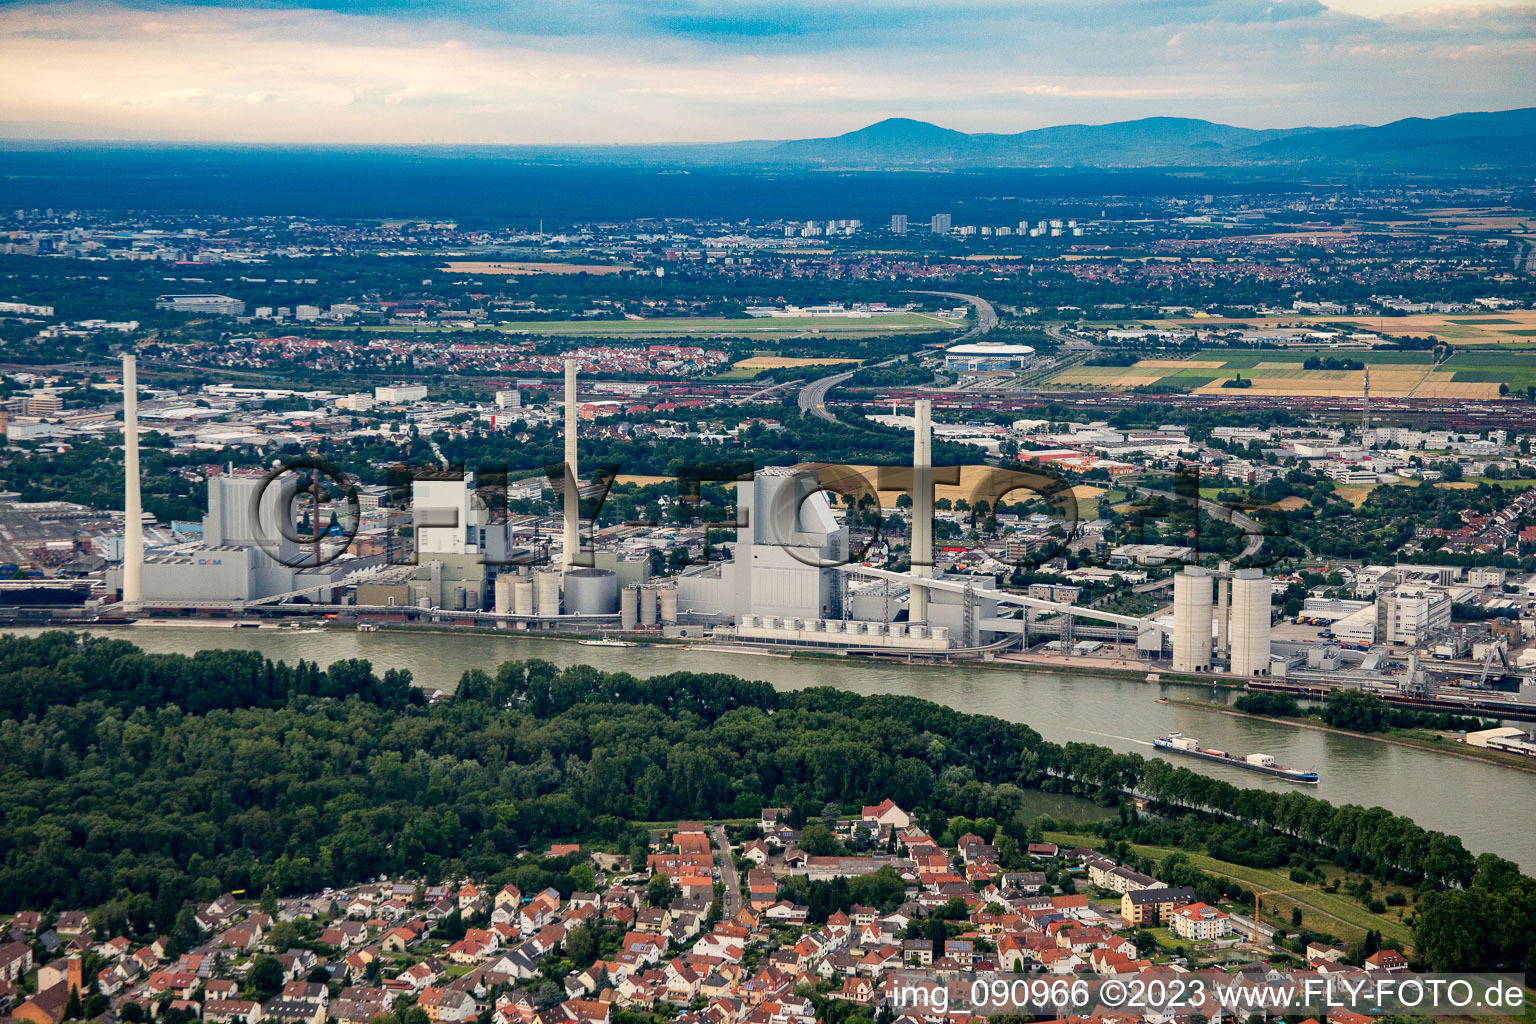 Aerial photograpy of GKM in the district Neckarau in Mannheim in the state Baden-Wuerttemberg, Germany